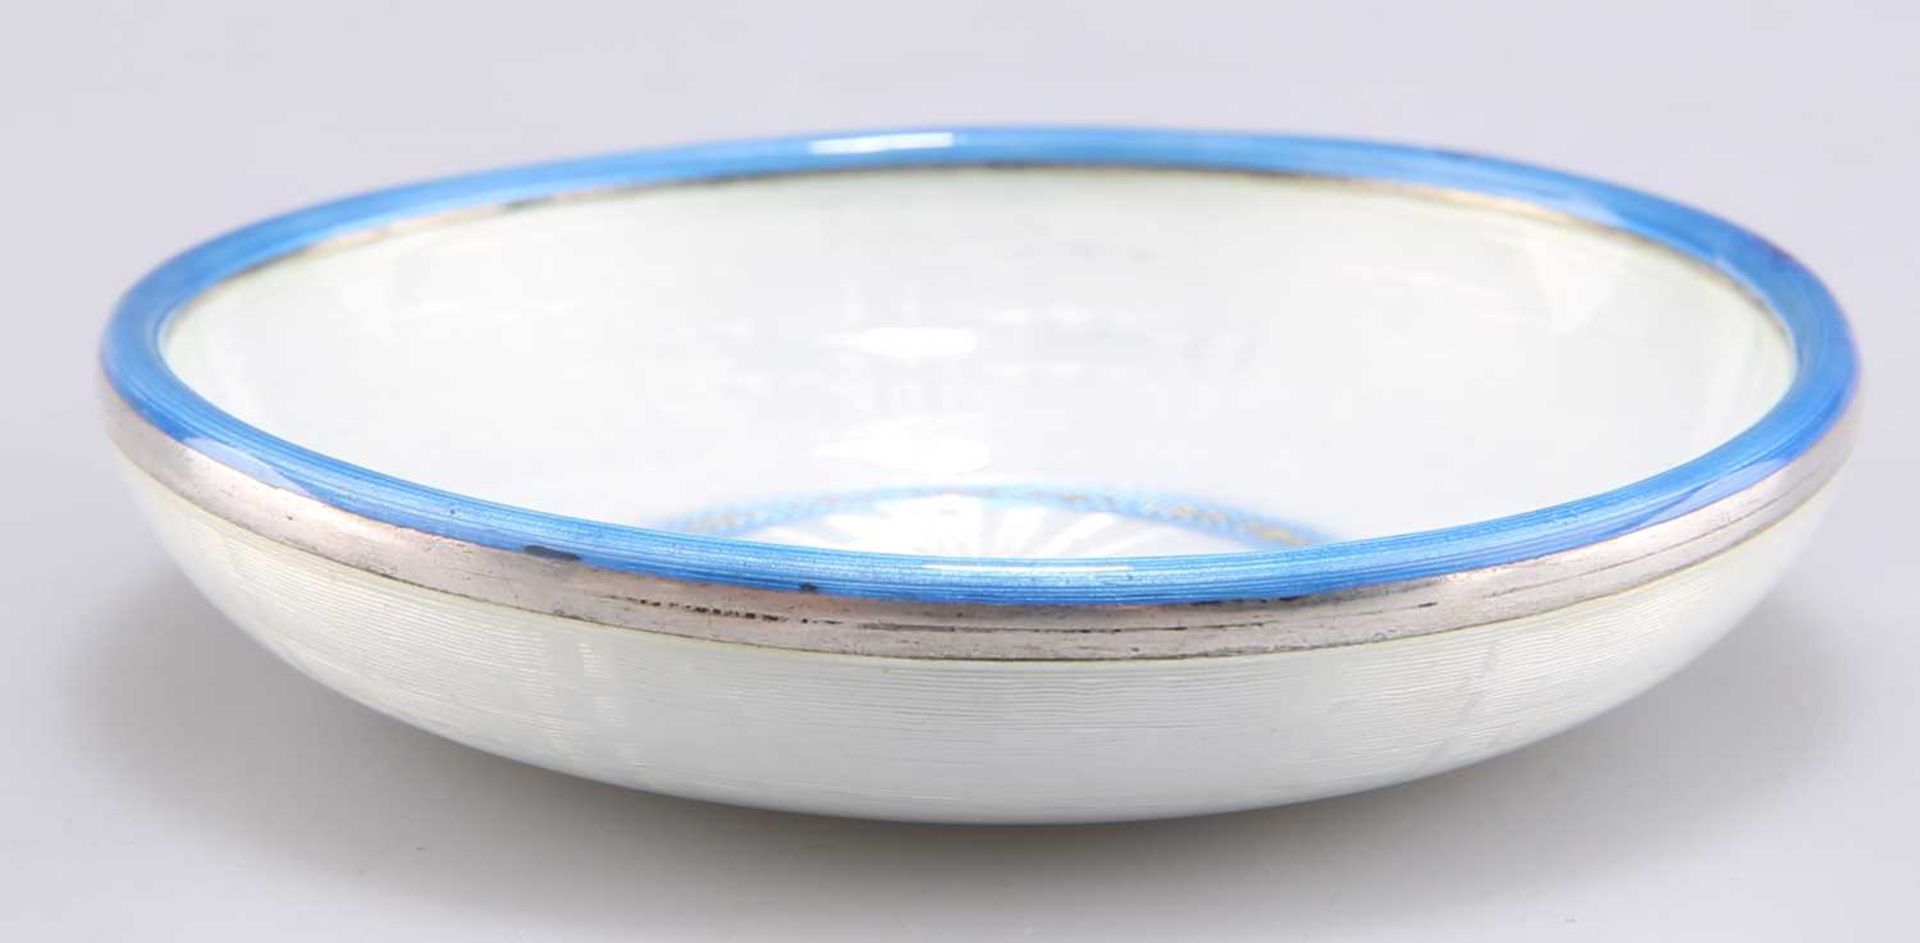 A GERMAN STERLING AND ENAMEL DISH, EARLY 20TH CENTURY - Image 2 of 2